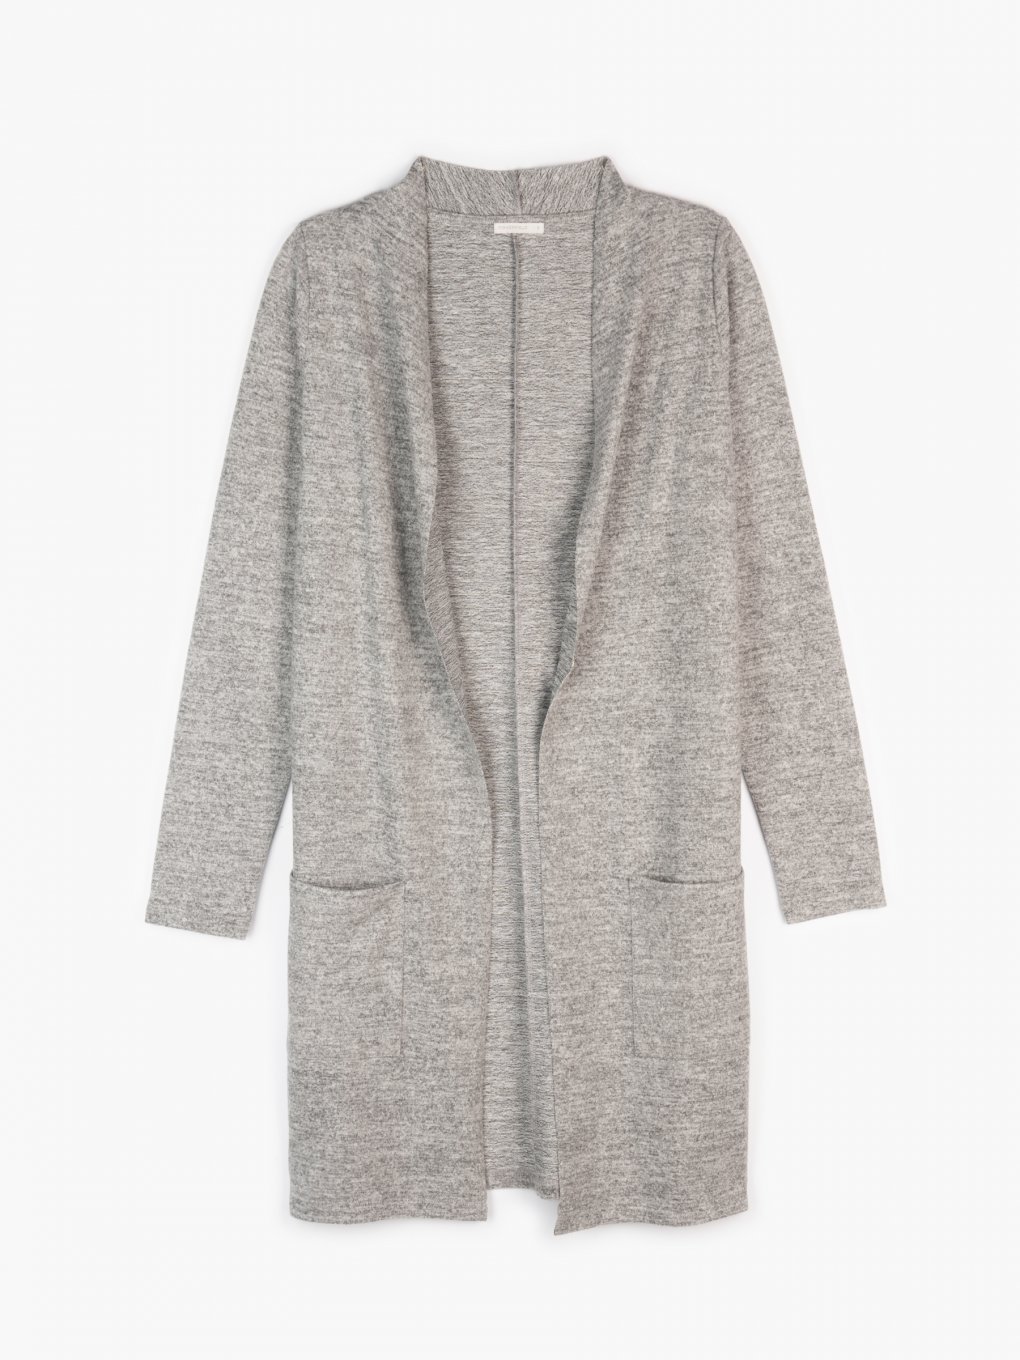 Long marled cardigan with pockets